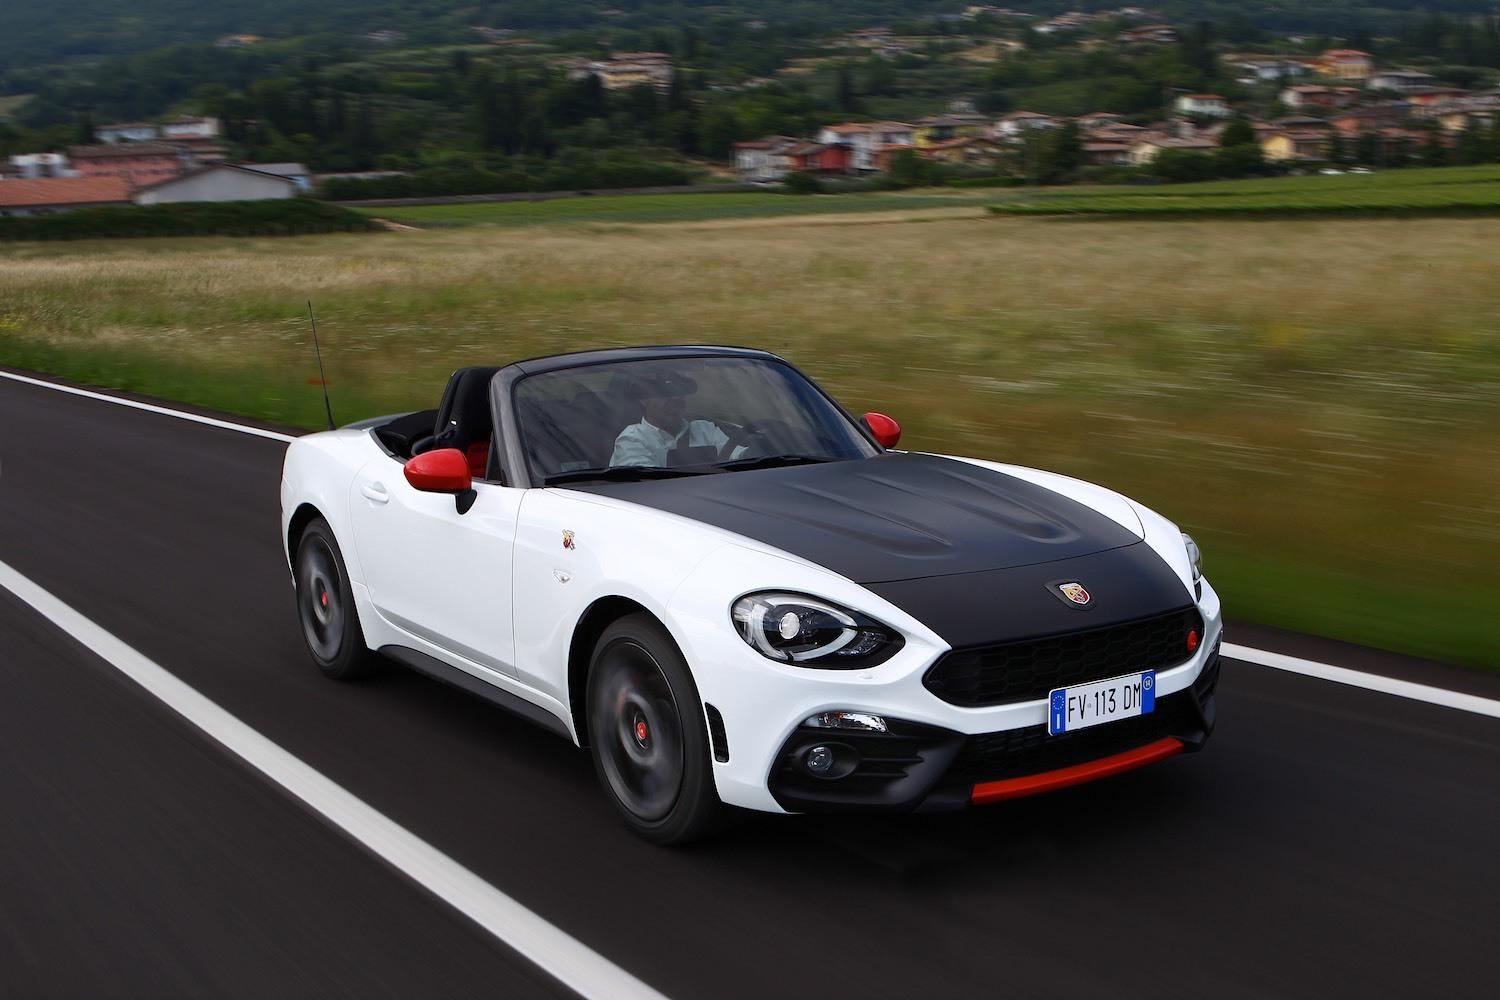 Jonathan Humphrey reviews the Abarth 124 Spider for Drive 11